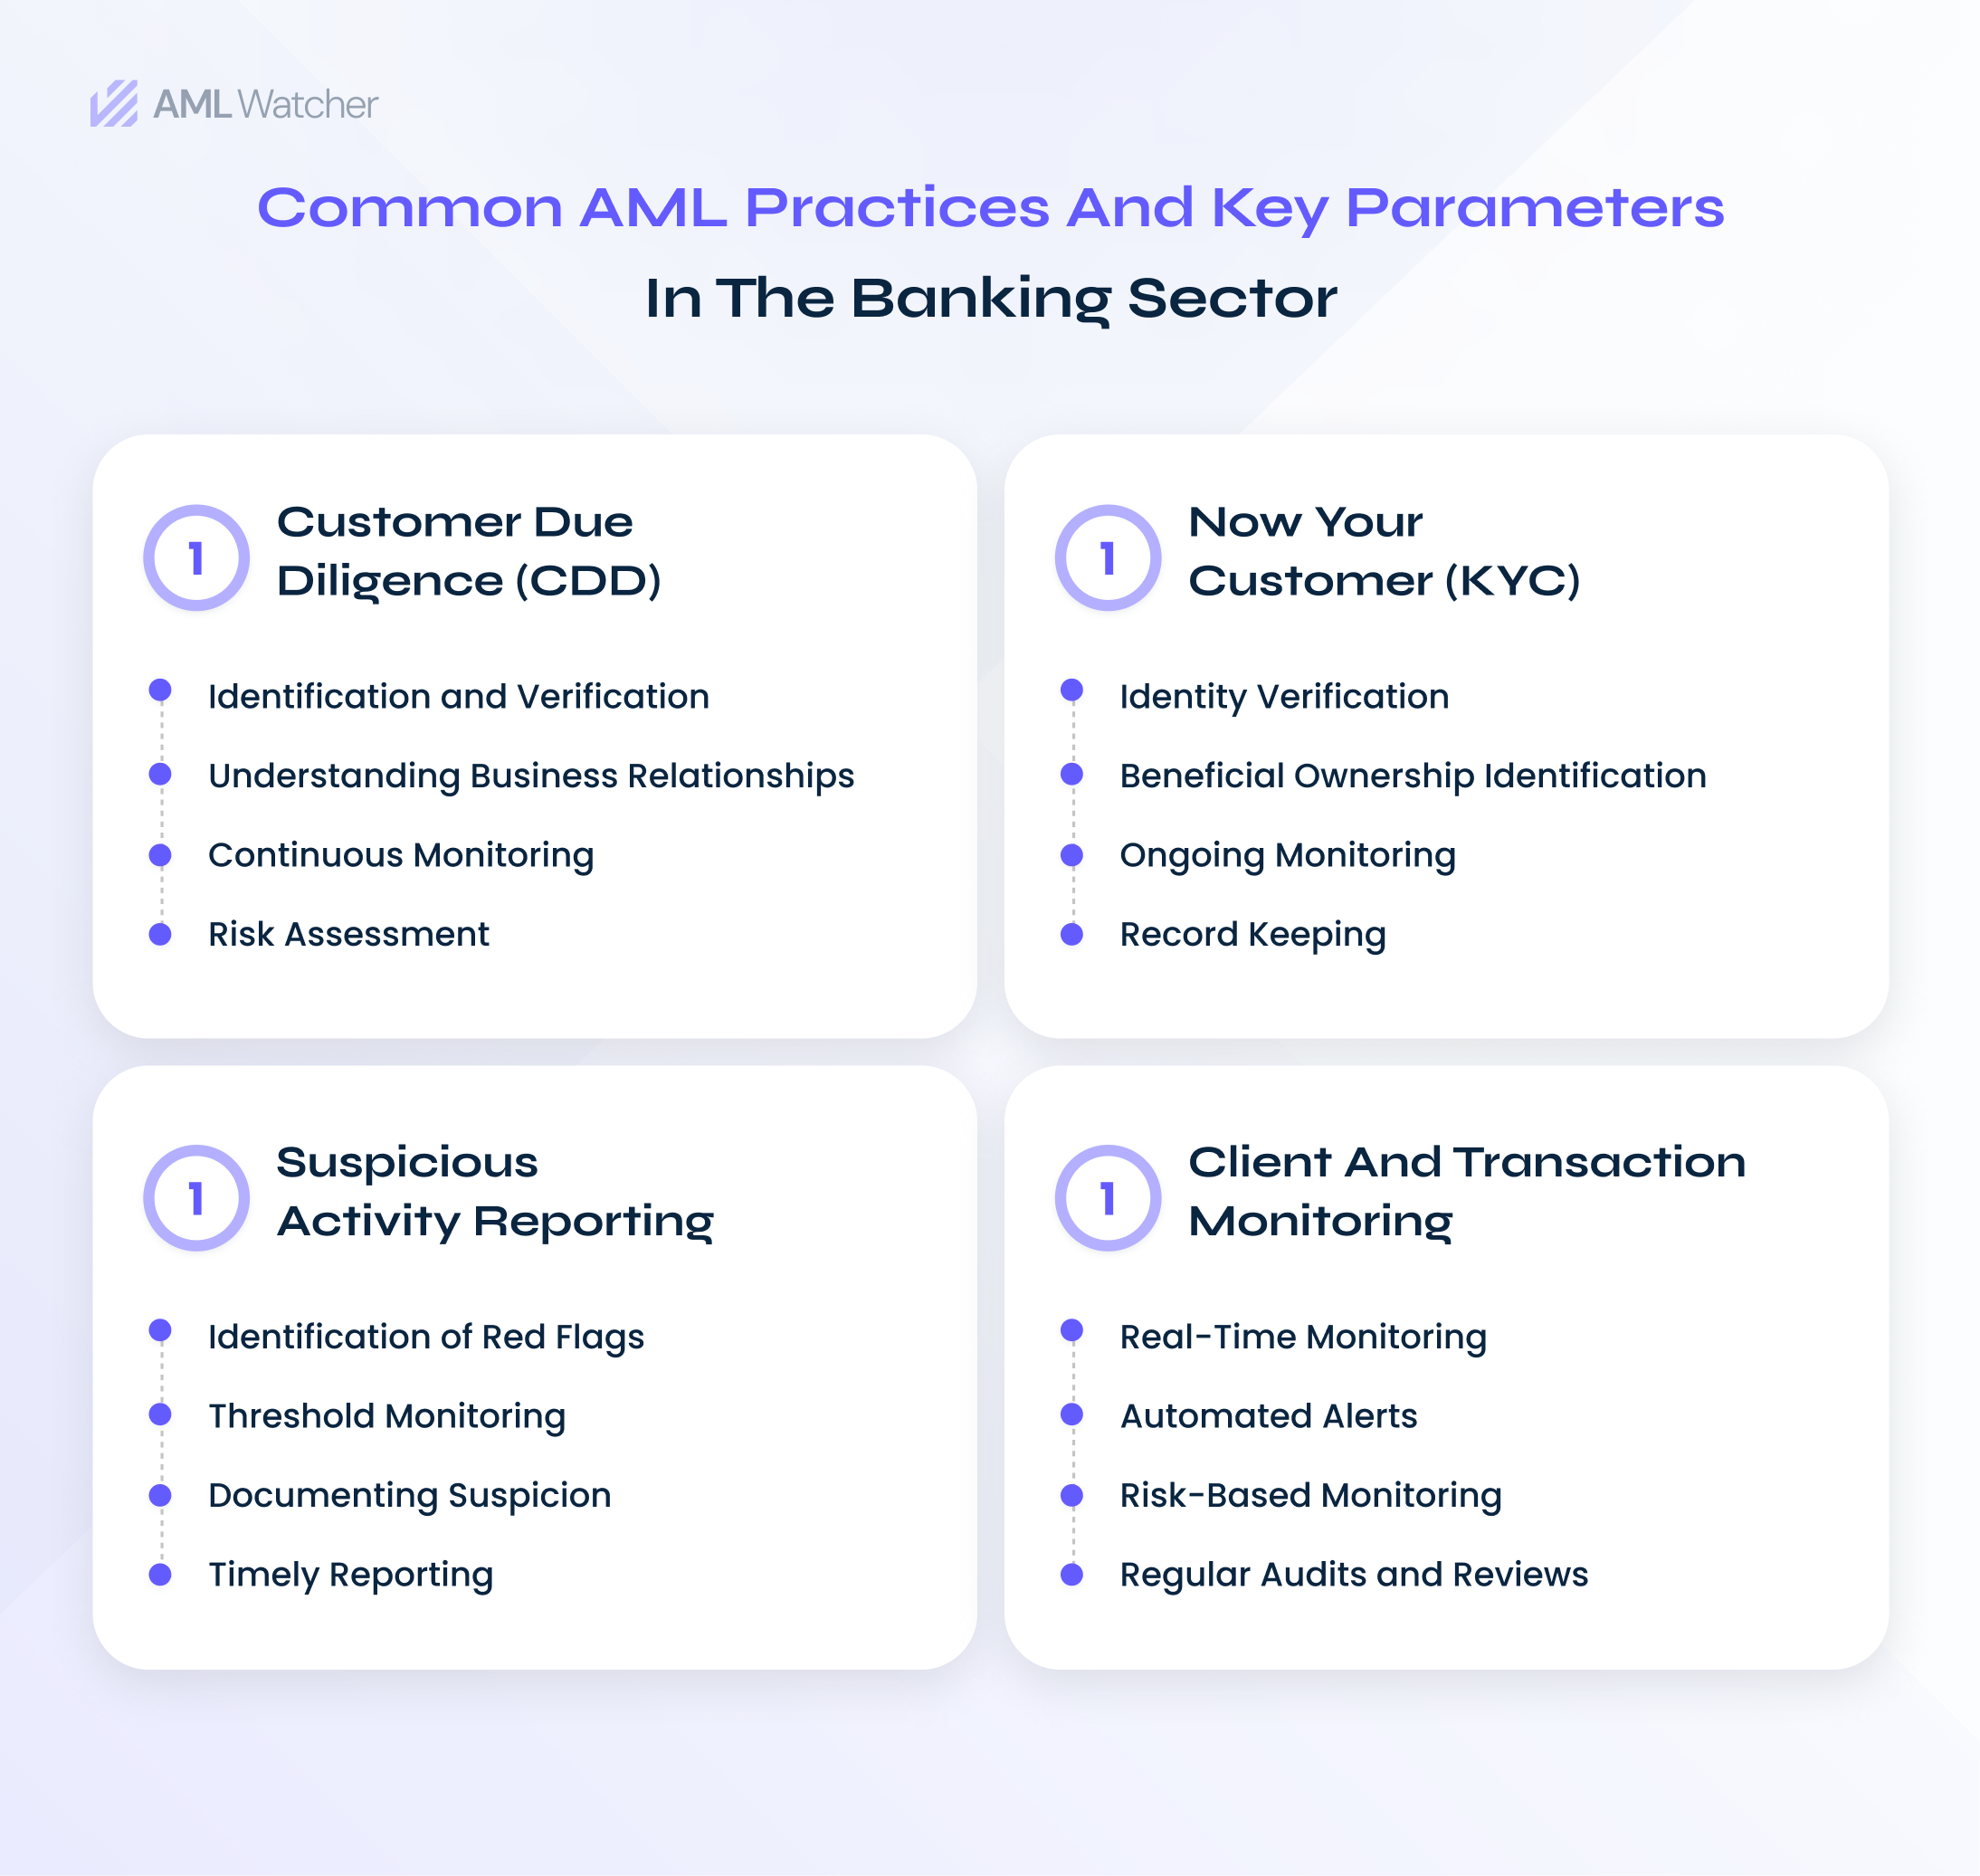 A brief overview of AML types in the banking sector along with the key factors to ensure robust compliance. The section includes customer due diligence (CDD), know your customer (KYC), suspicious activity reporting (SAR), and client and transaction monitoring.